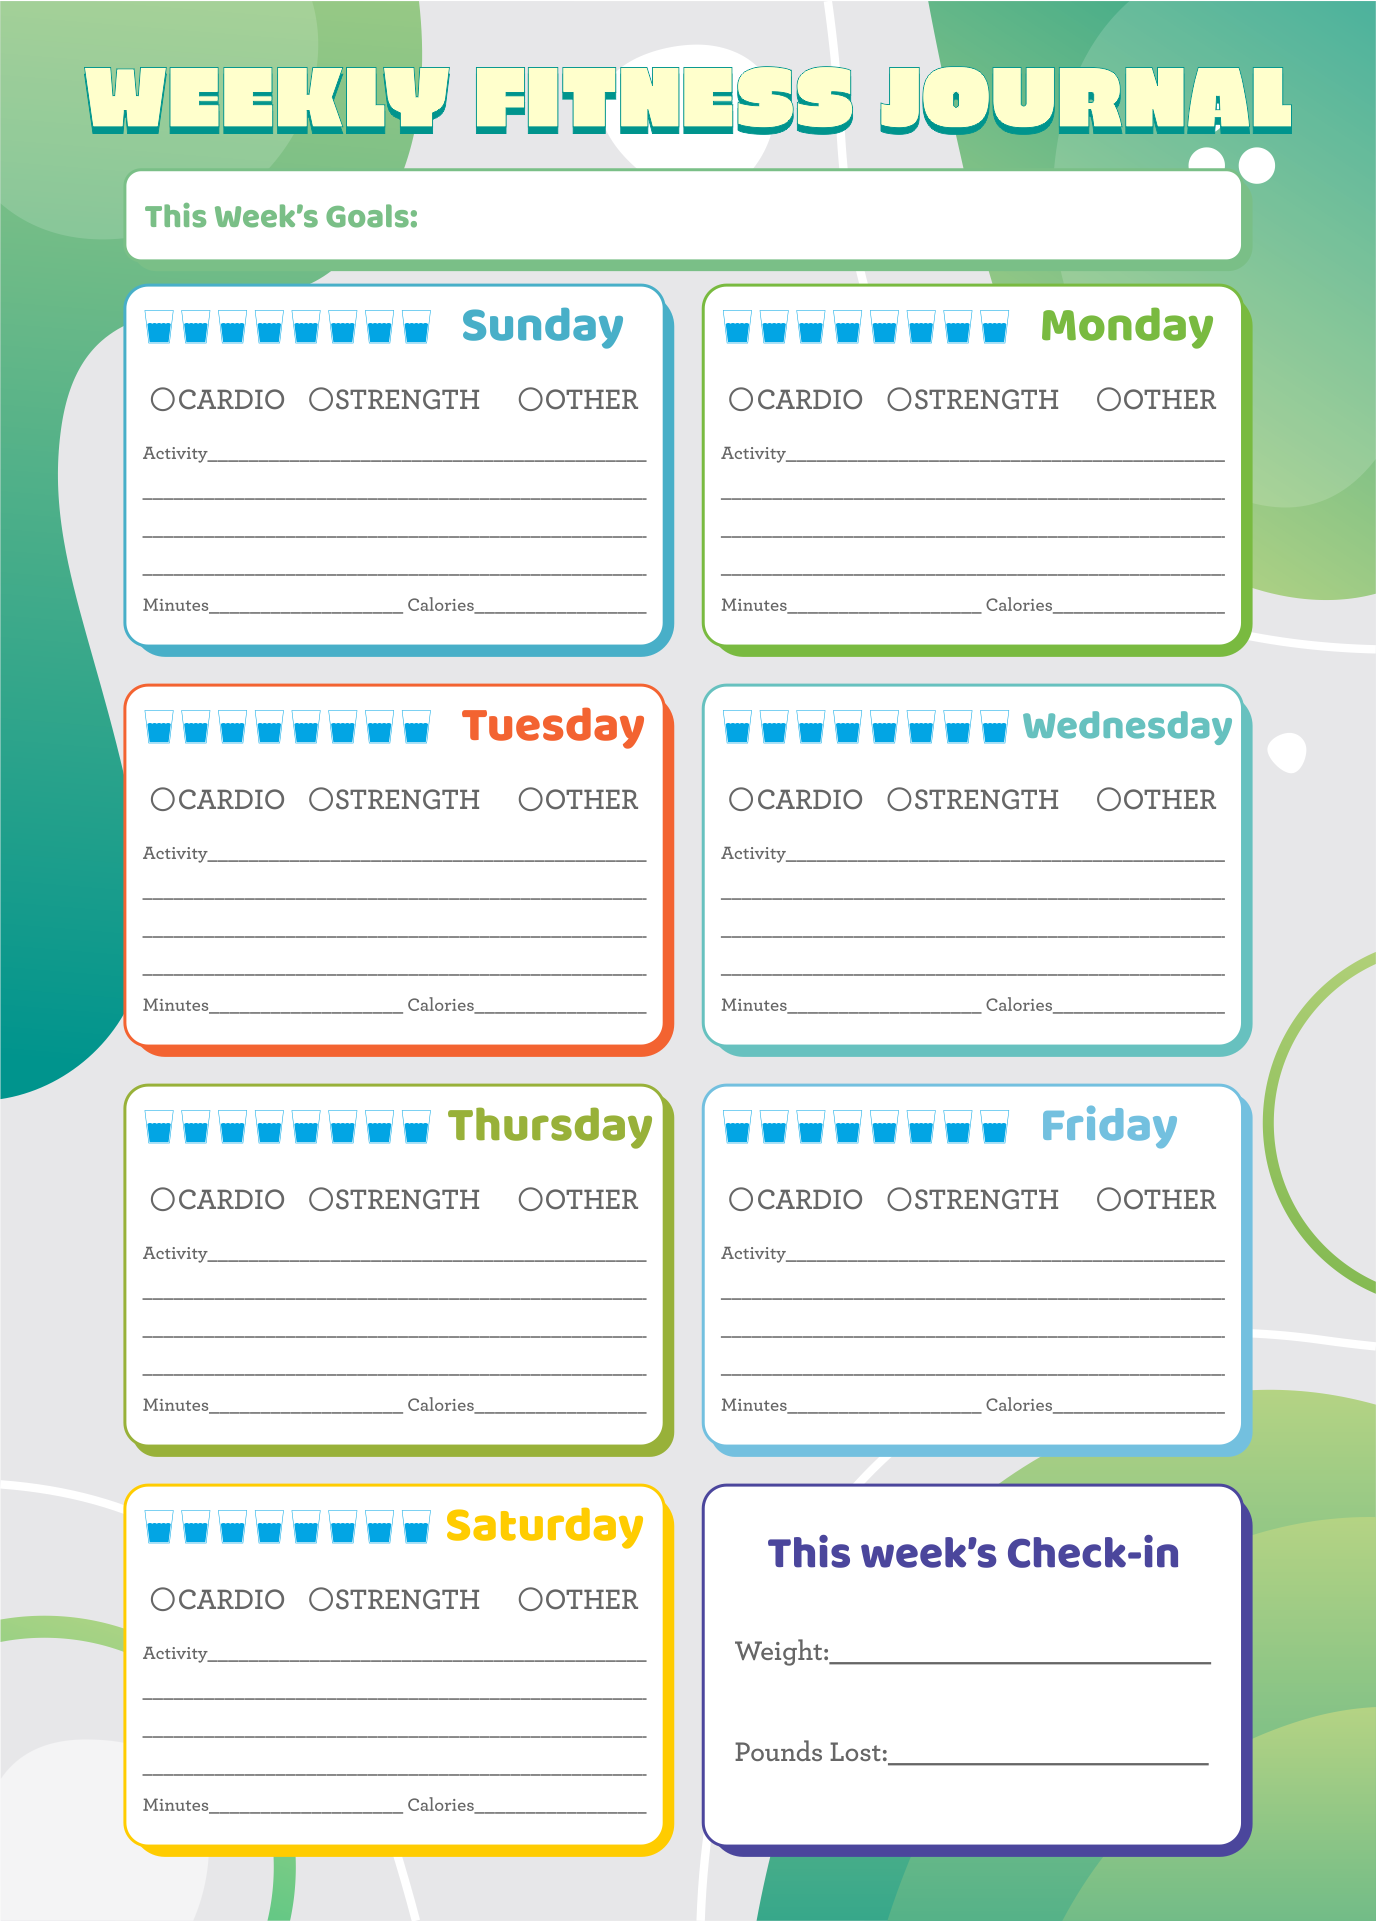 9 Best Images of Free Printable Exercise Journal - Printable Exercise ...